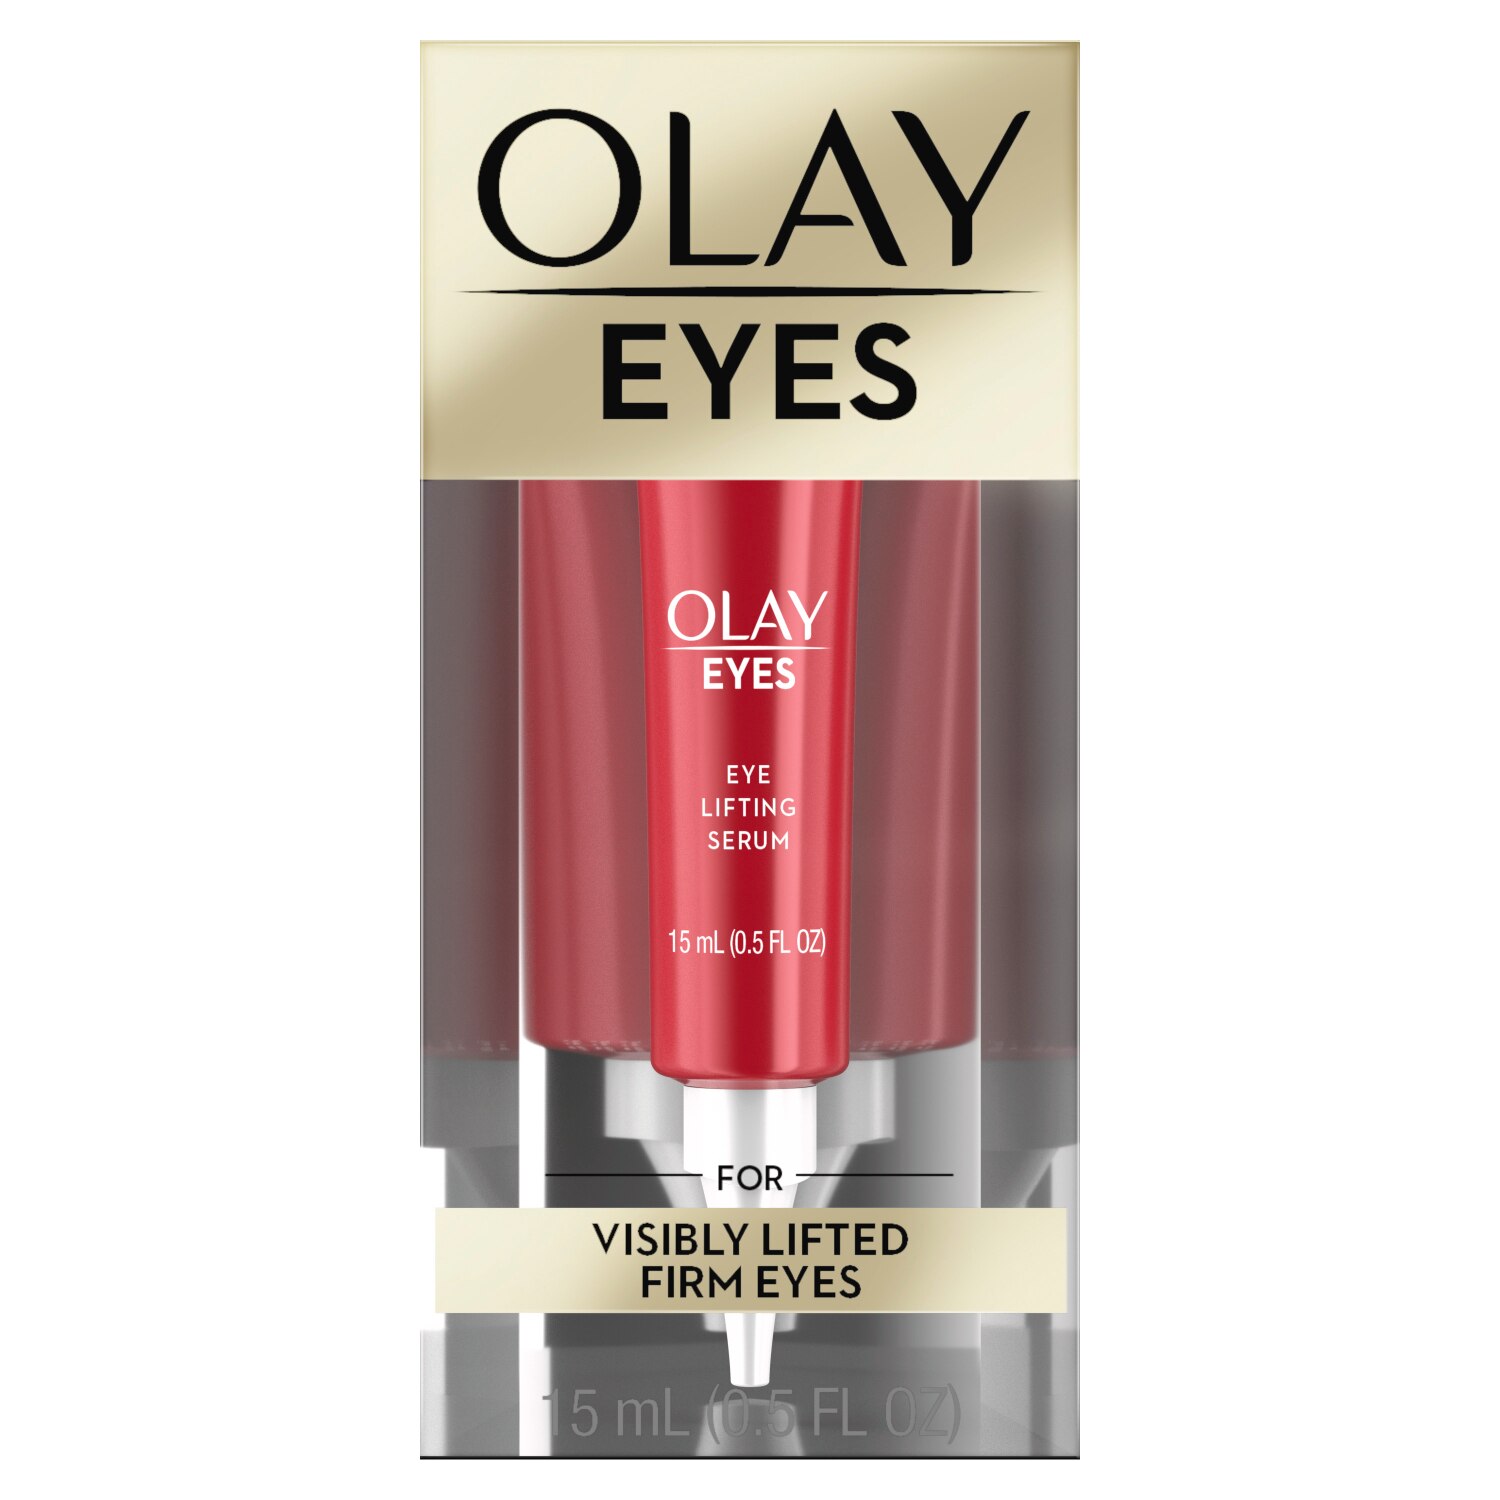 Olay Eyes Eye Lifting Serum for Visibly Lifted Firm Eyes, 0.5 OZ